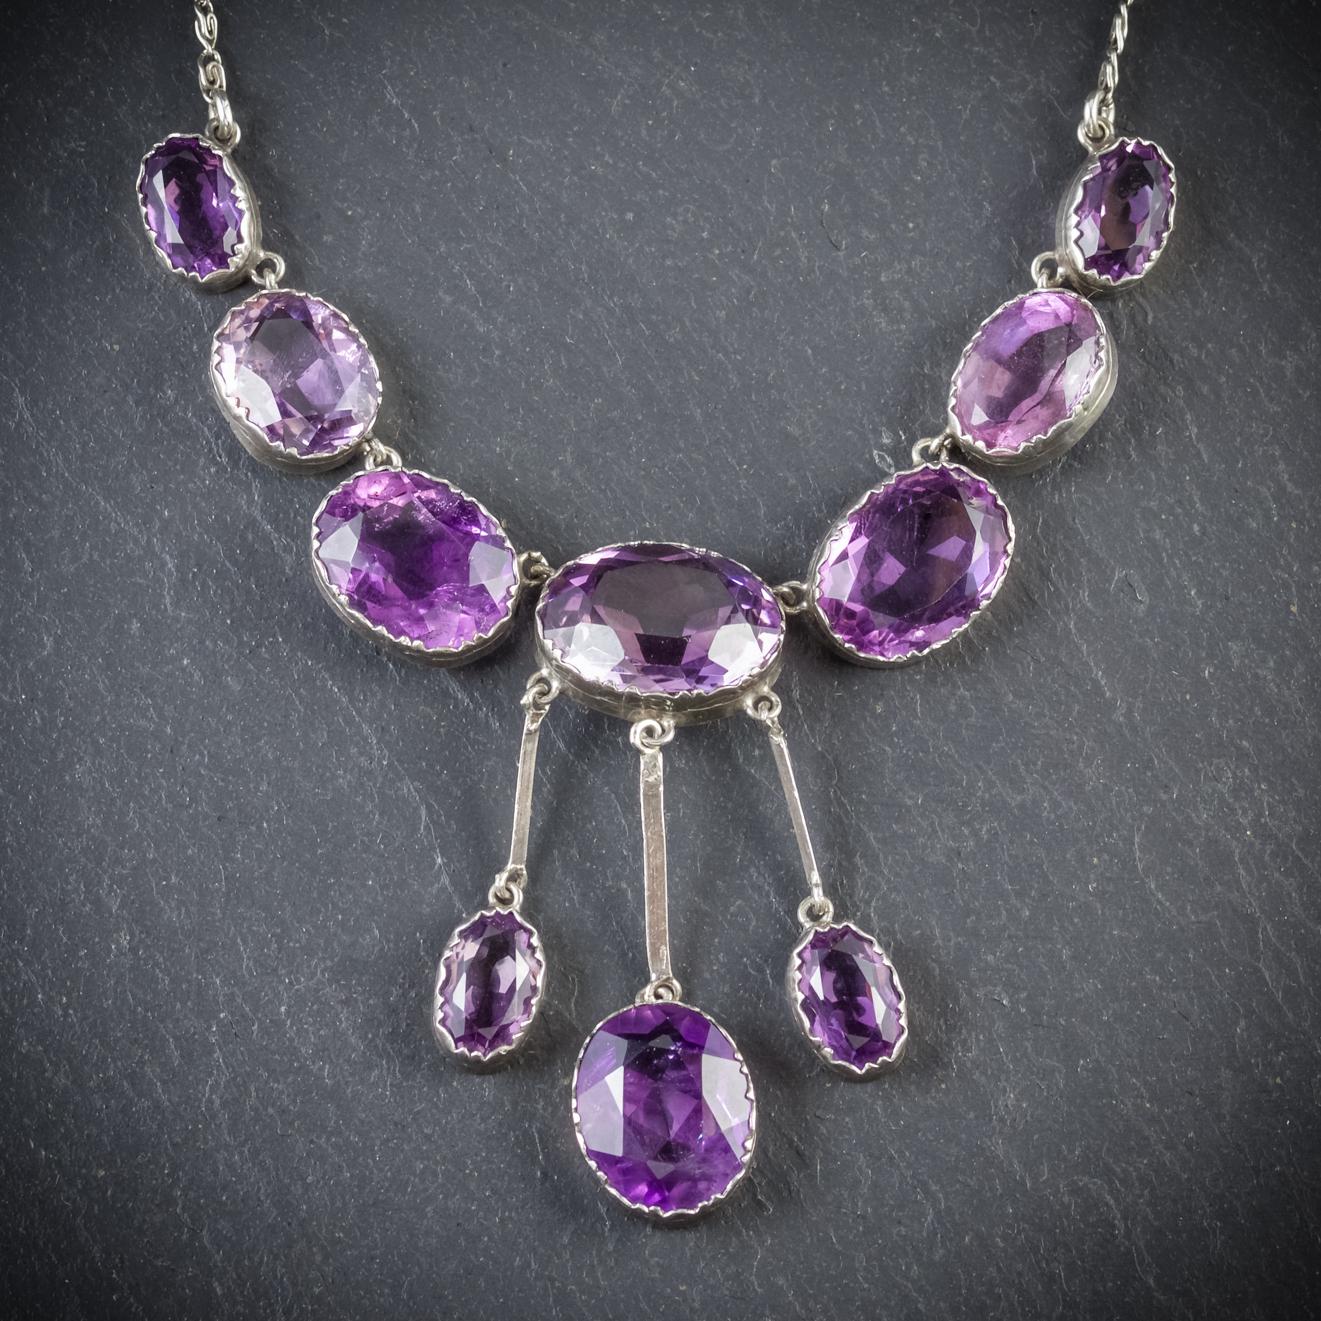 A magnificent antique Amethyst necklace from the Victorian era, Circa 1900

The necklace is set in Silver and displays beautiful violet Amethyst’s with three fabulous Amethyst droppers dangling below

There are 40ct of Amethyst across the piece,